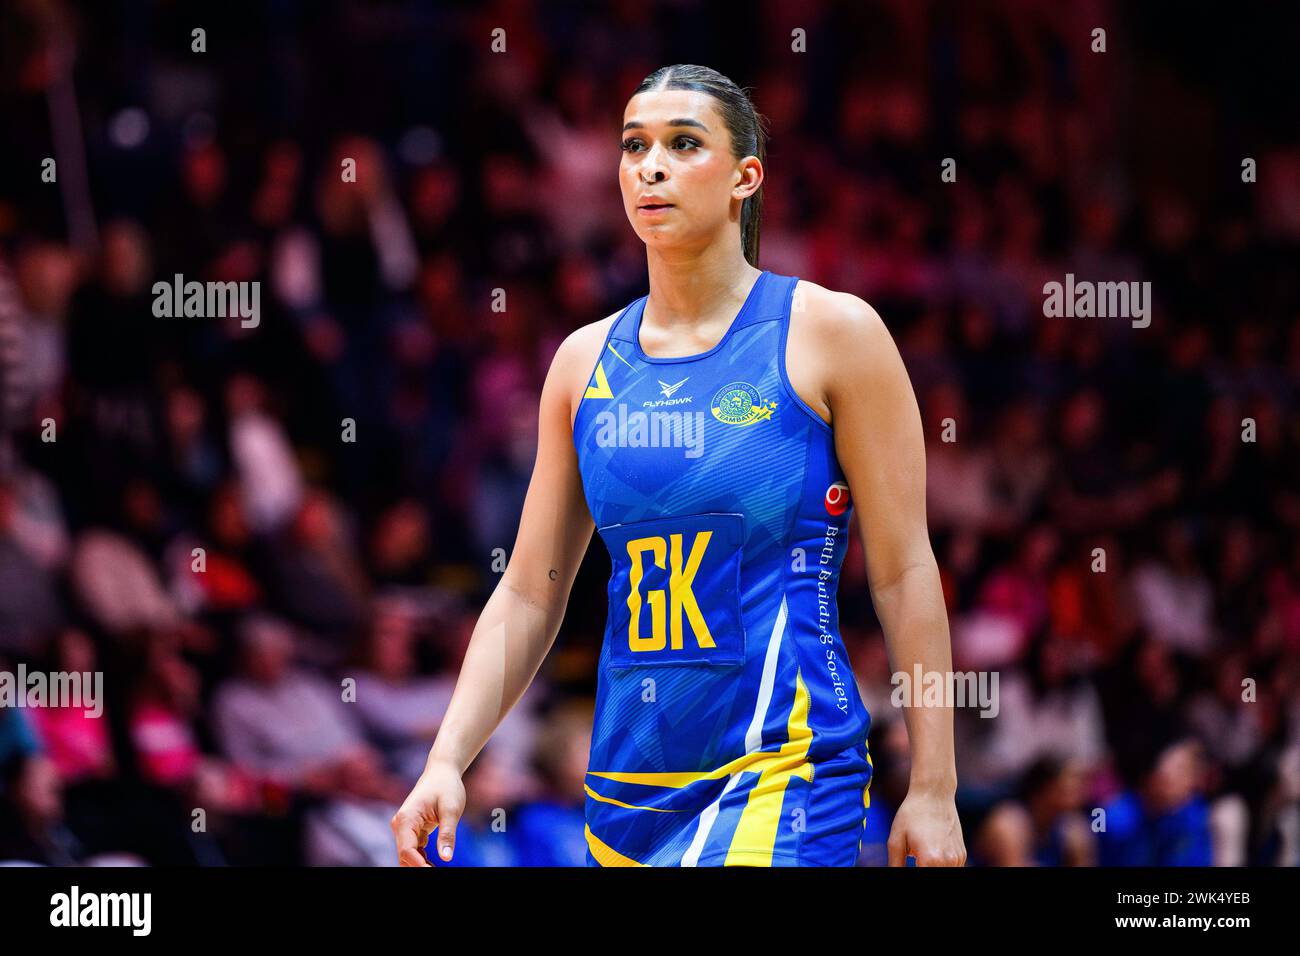 NOTTINGHAM, UNITED KINGDOM. Feb 17, 24. Jayda Pechora in action during todays match of Strathclyde Sirens v Team Bath during Netball Super League Season Opener 2024 at Motorpoint Arena on Saturday, February 17, 2024, NOTTINGHAM, ENGLAND. Credit: Taka G Wu/Alamy Live News Stock Photo